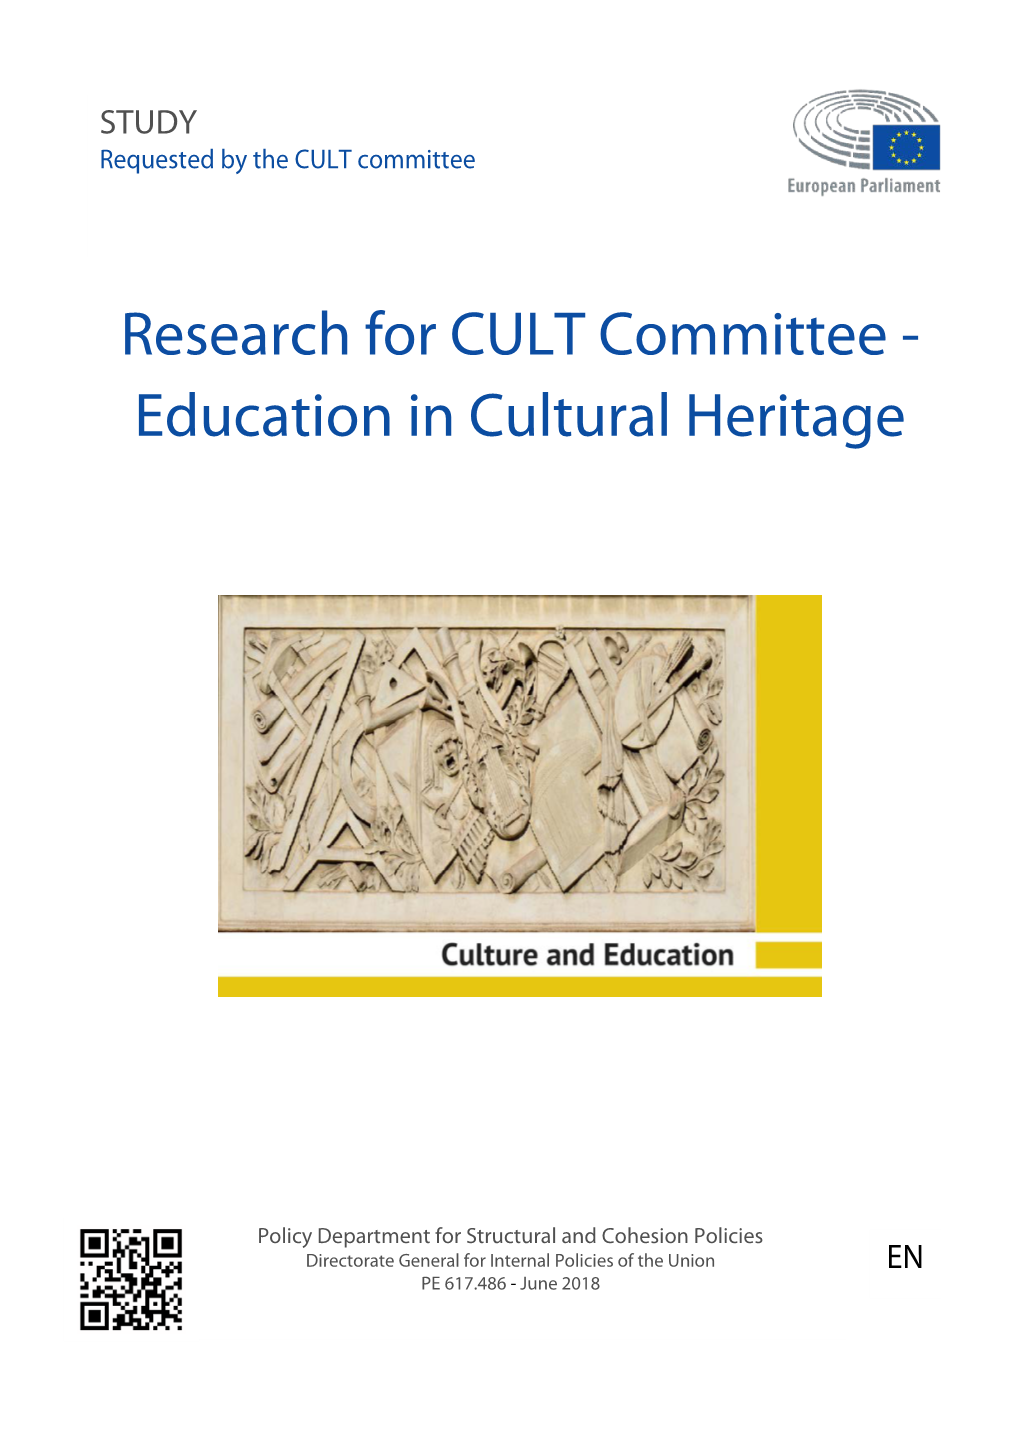 Research for CULT Committee - Education in Cultural Heritage